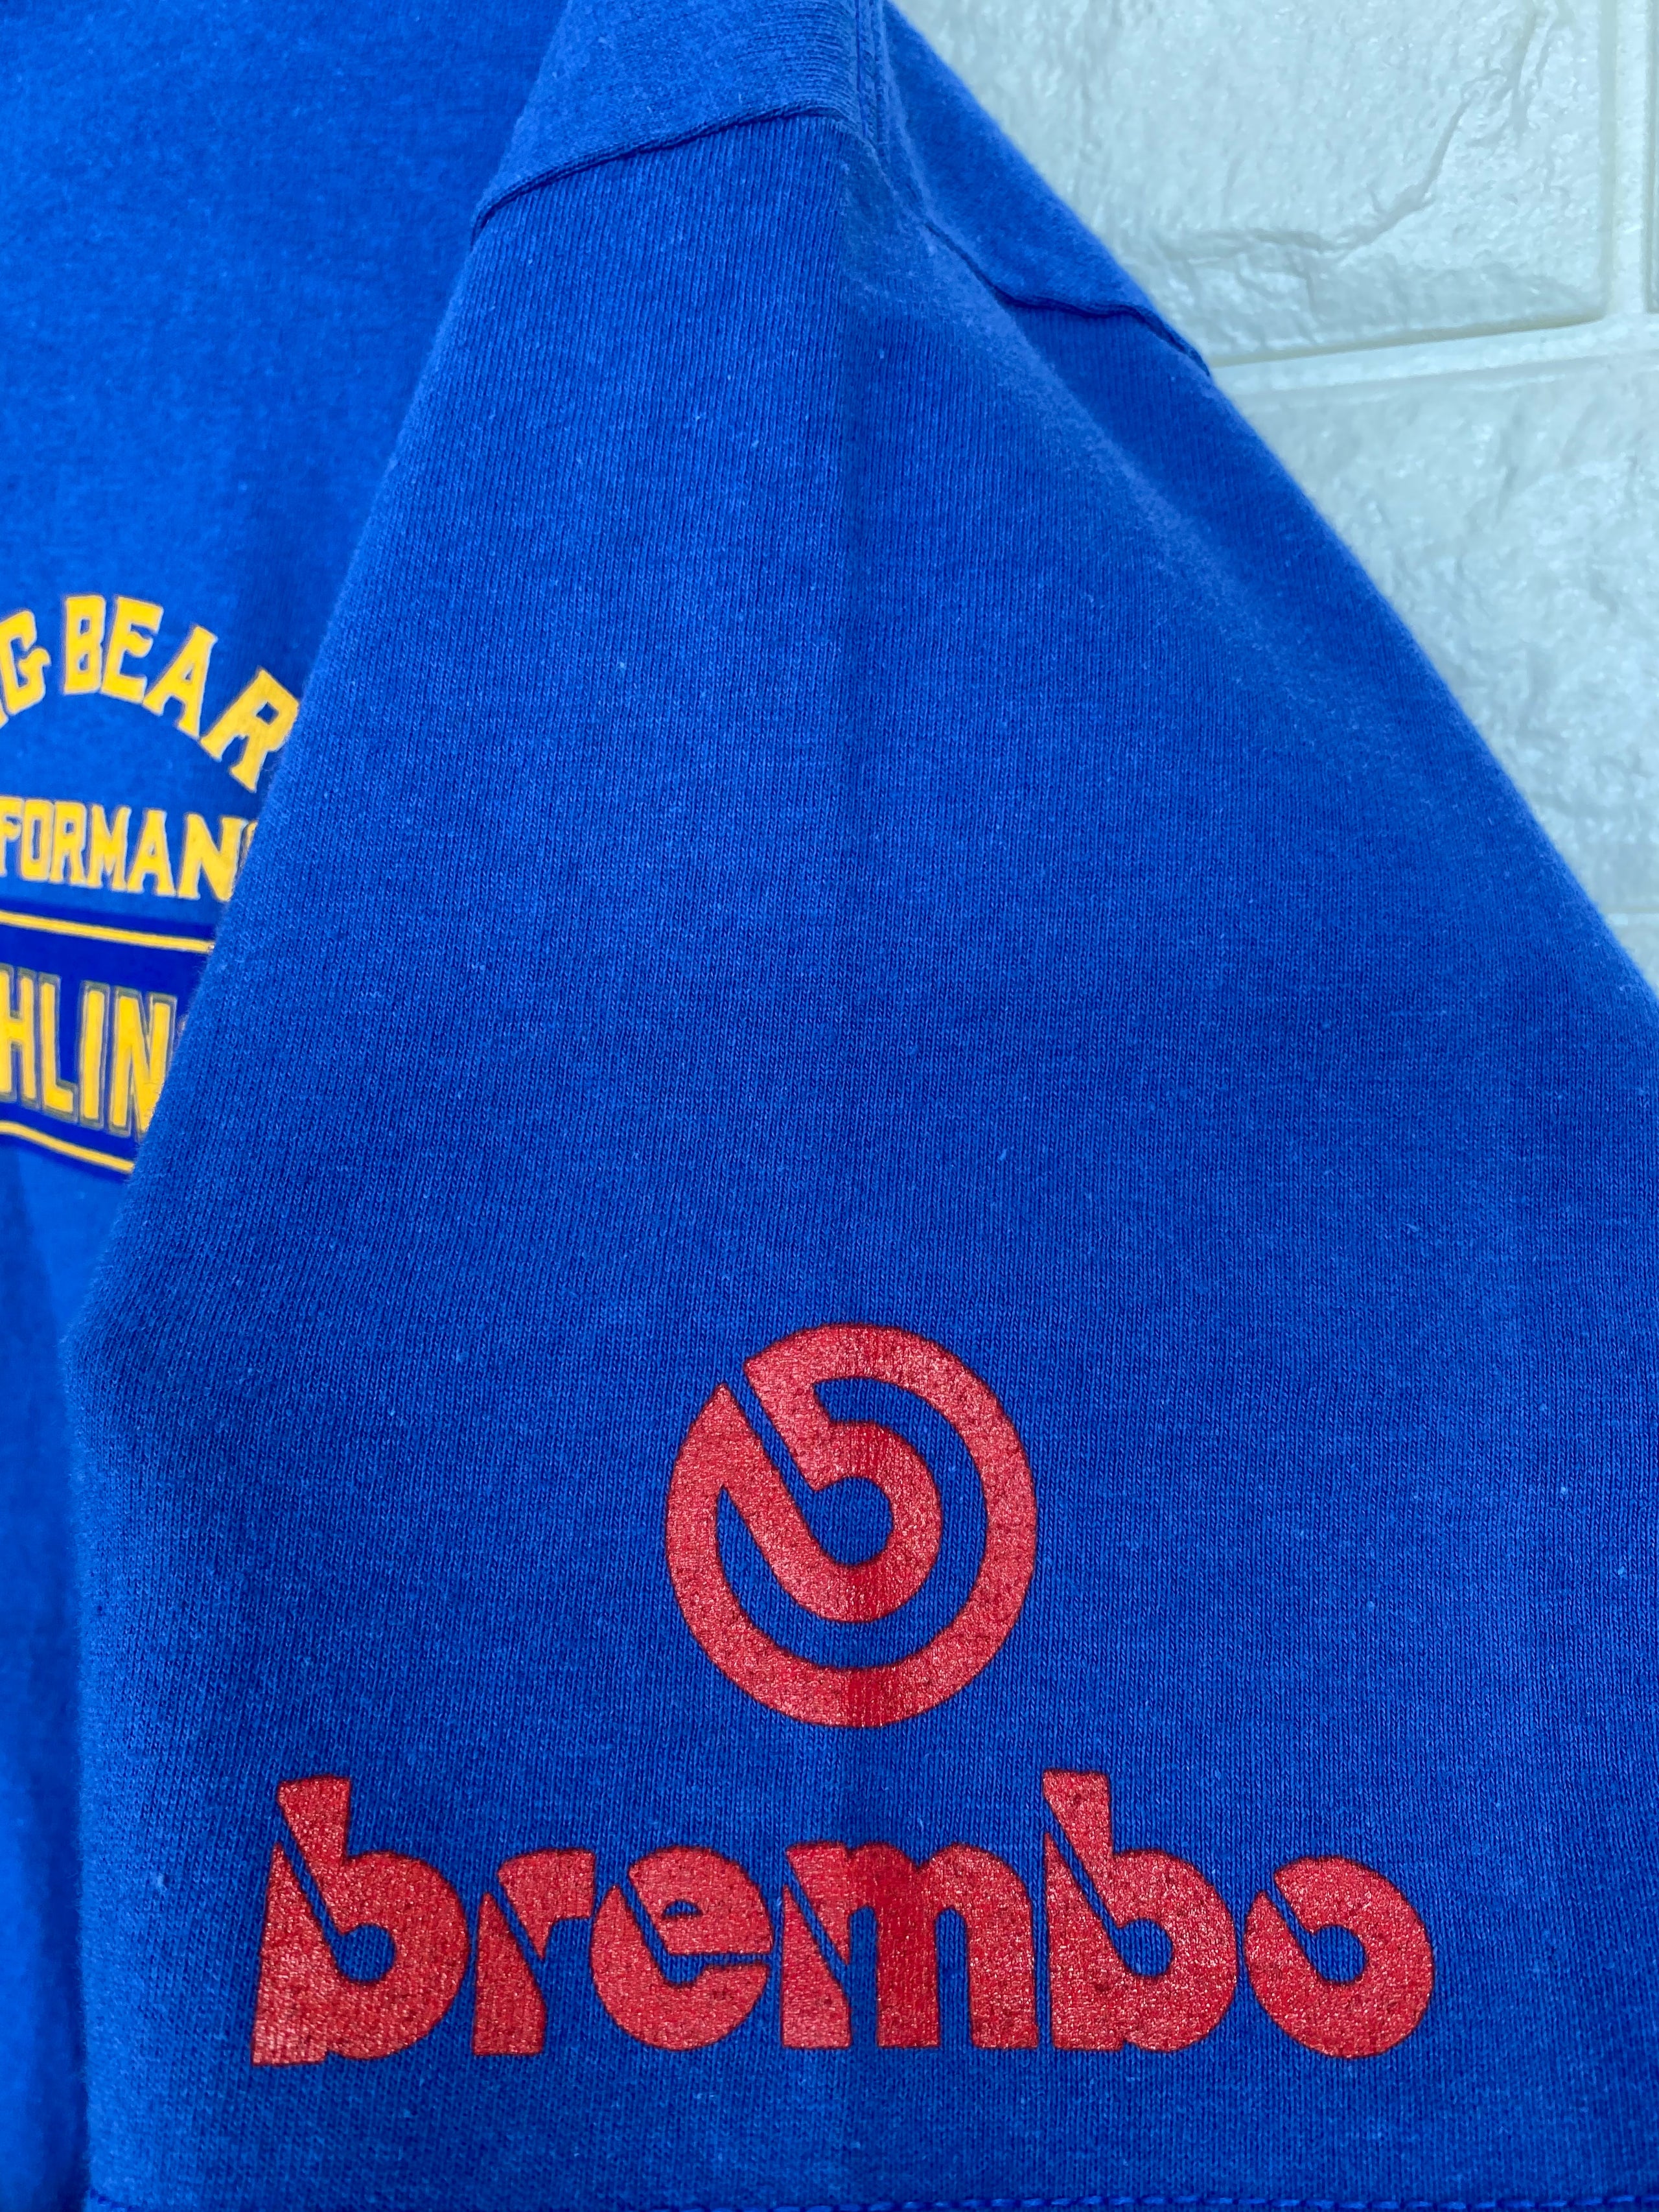 p Blue T Shirt With Ohlins Brembo Logo Vehicle Depot Online Store